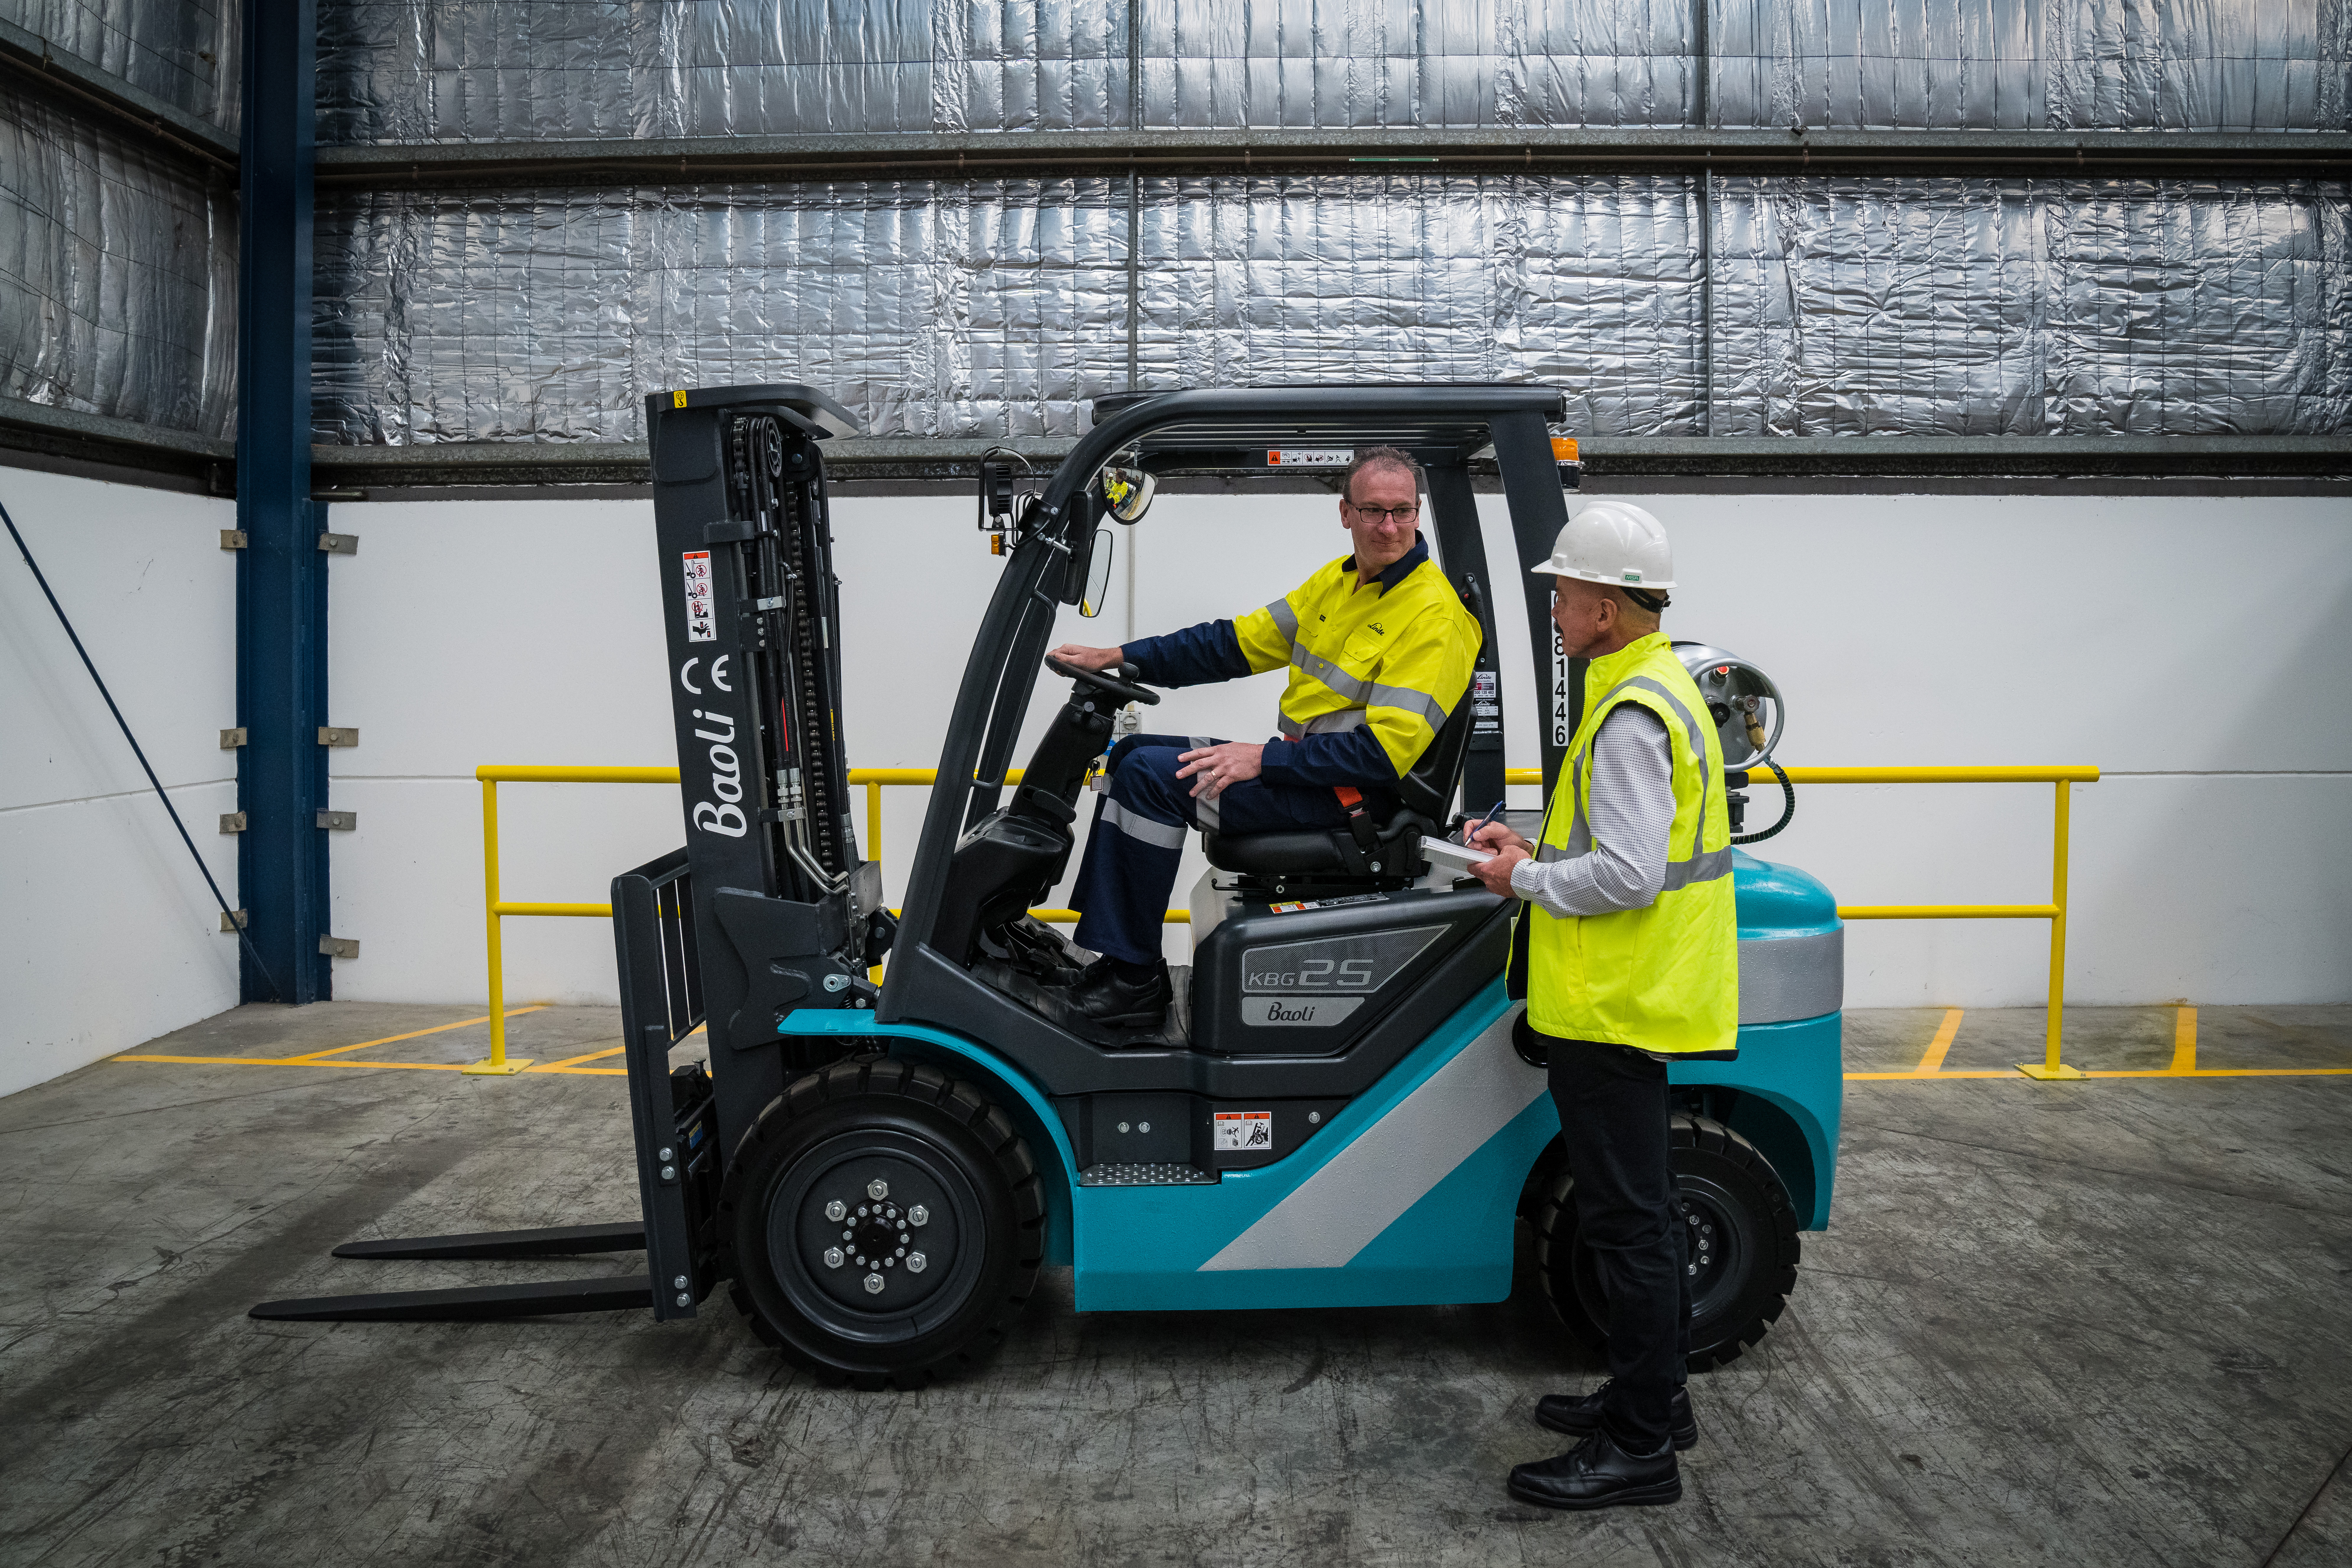 Blue Baoli with protective clothing to stay safe in forklift warehouse